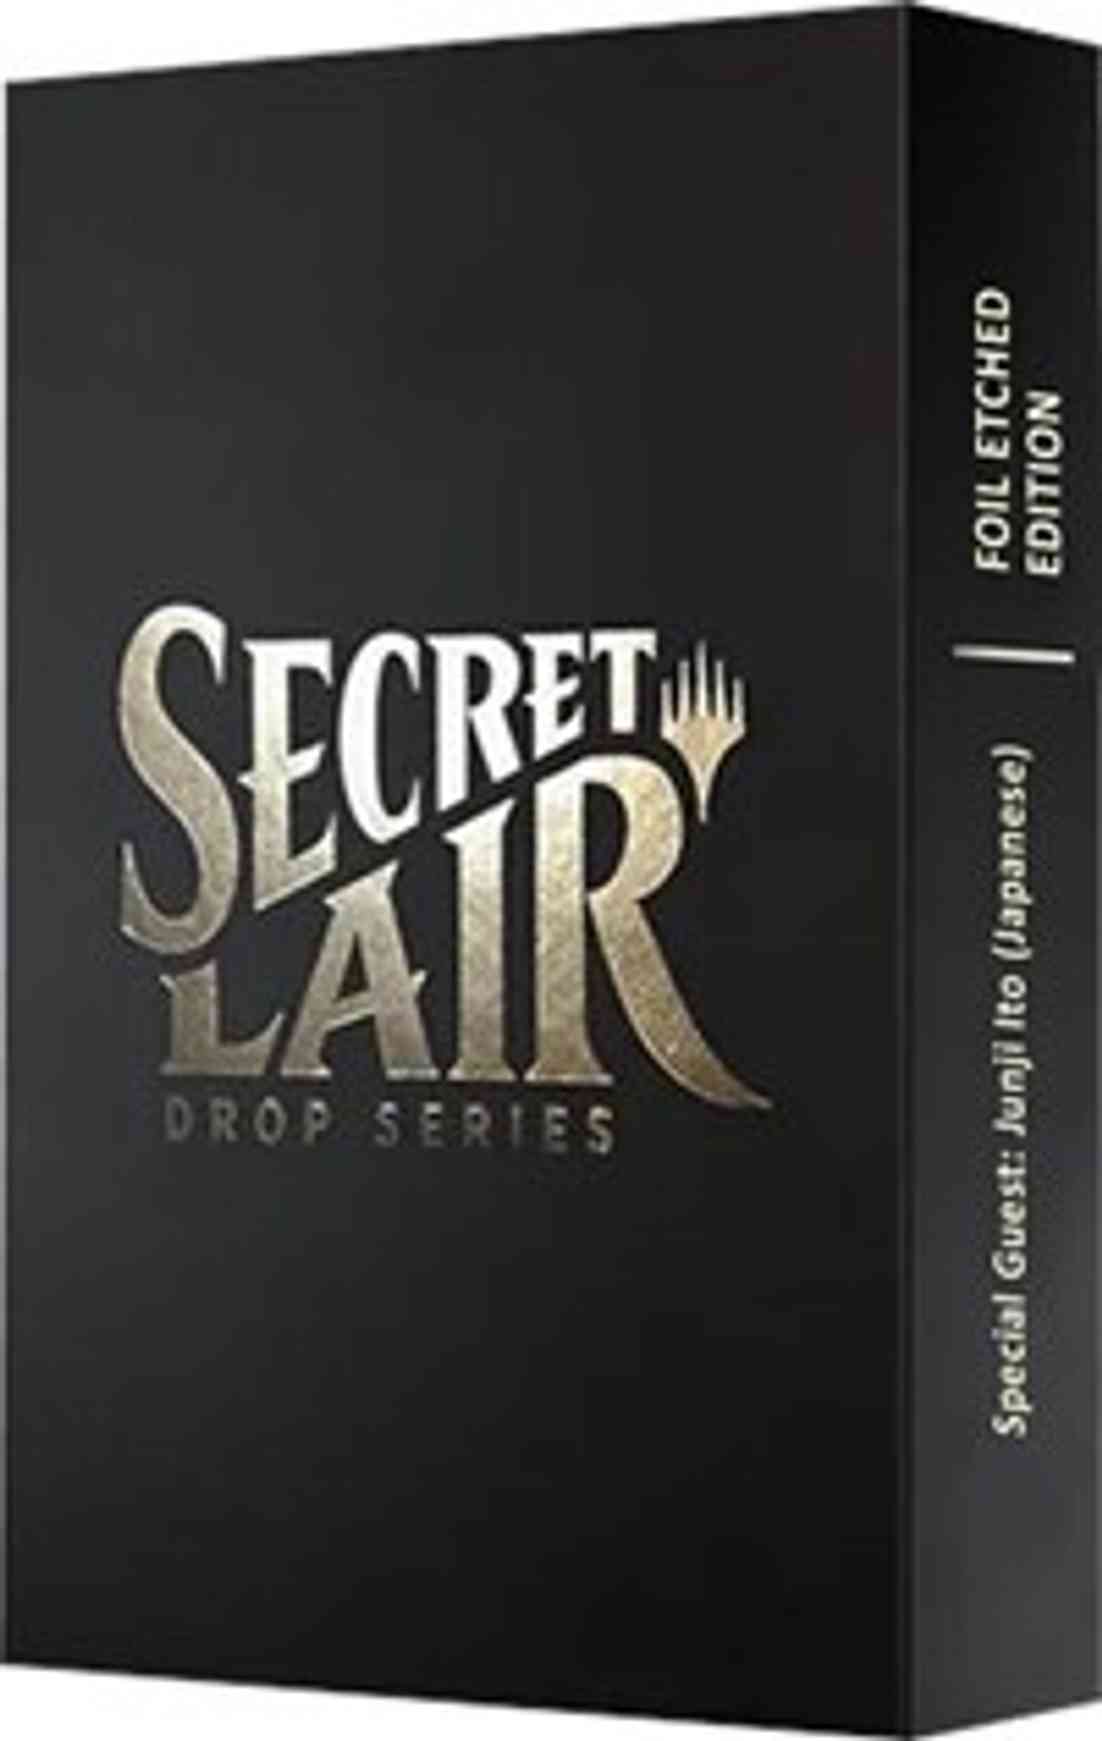 Secret Lair Drop: Special Guest: Junji Ito (Japanese) - Foil Etched Edition magic card front